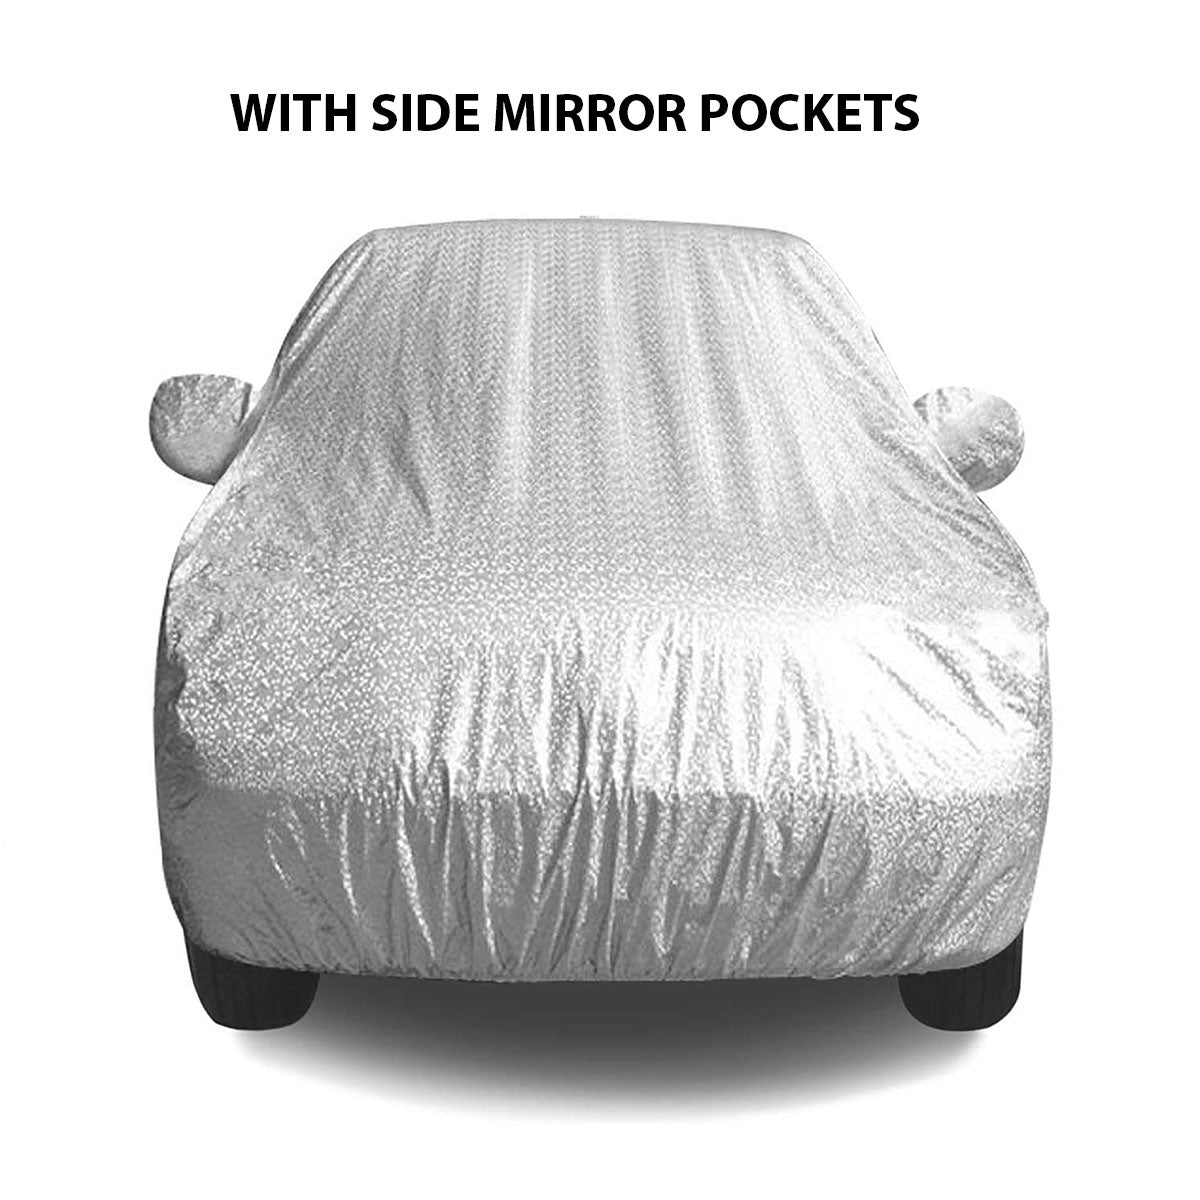 Oshotto Spyro Silver Anti Reflective, dustproof and Water Proof Car Body Cover with Mirror Pockets For Tata Tigor